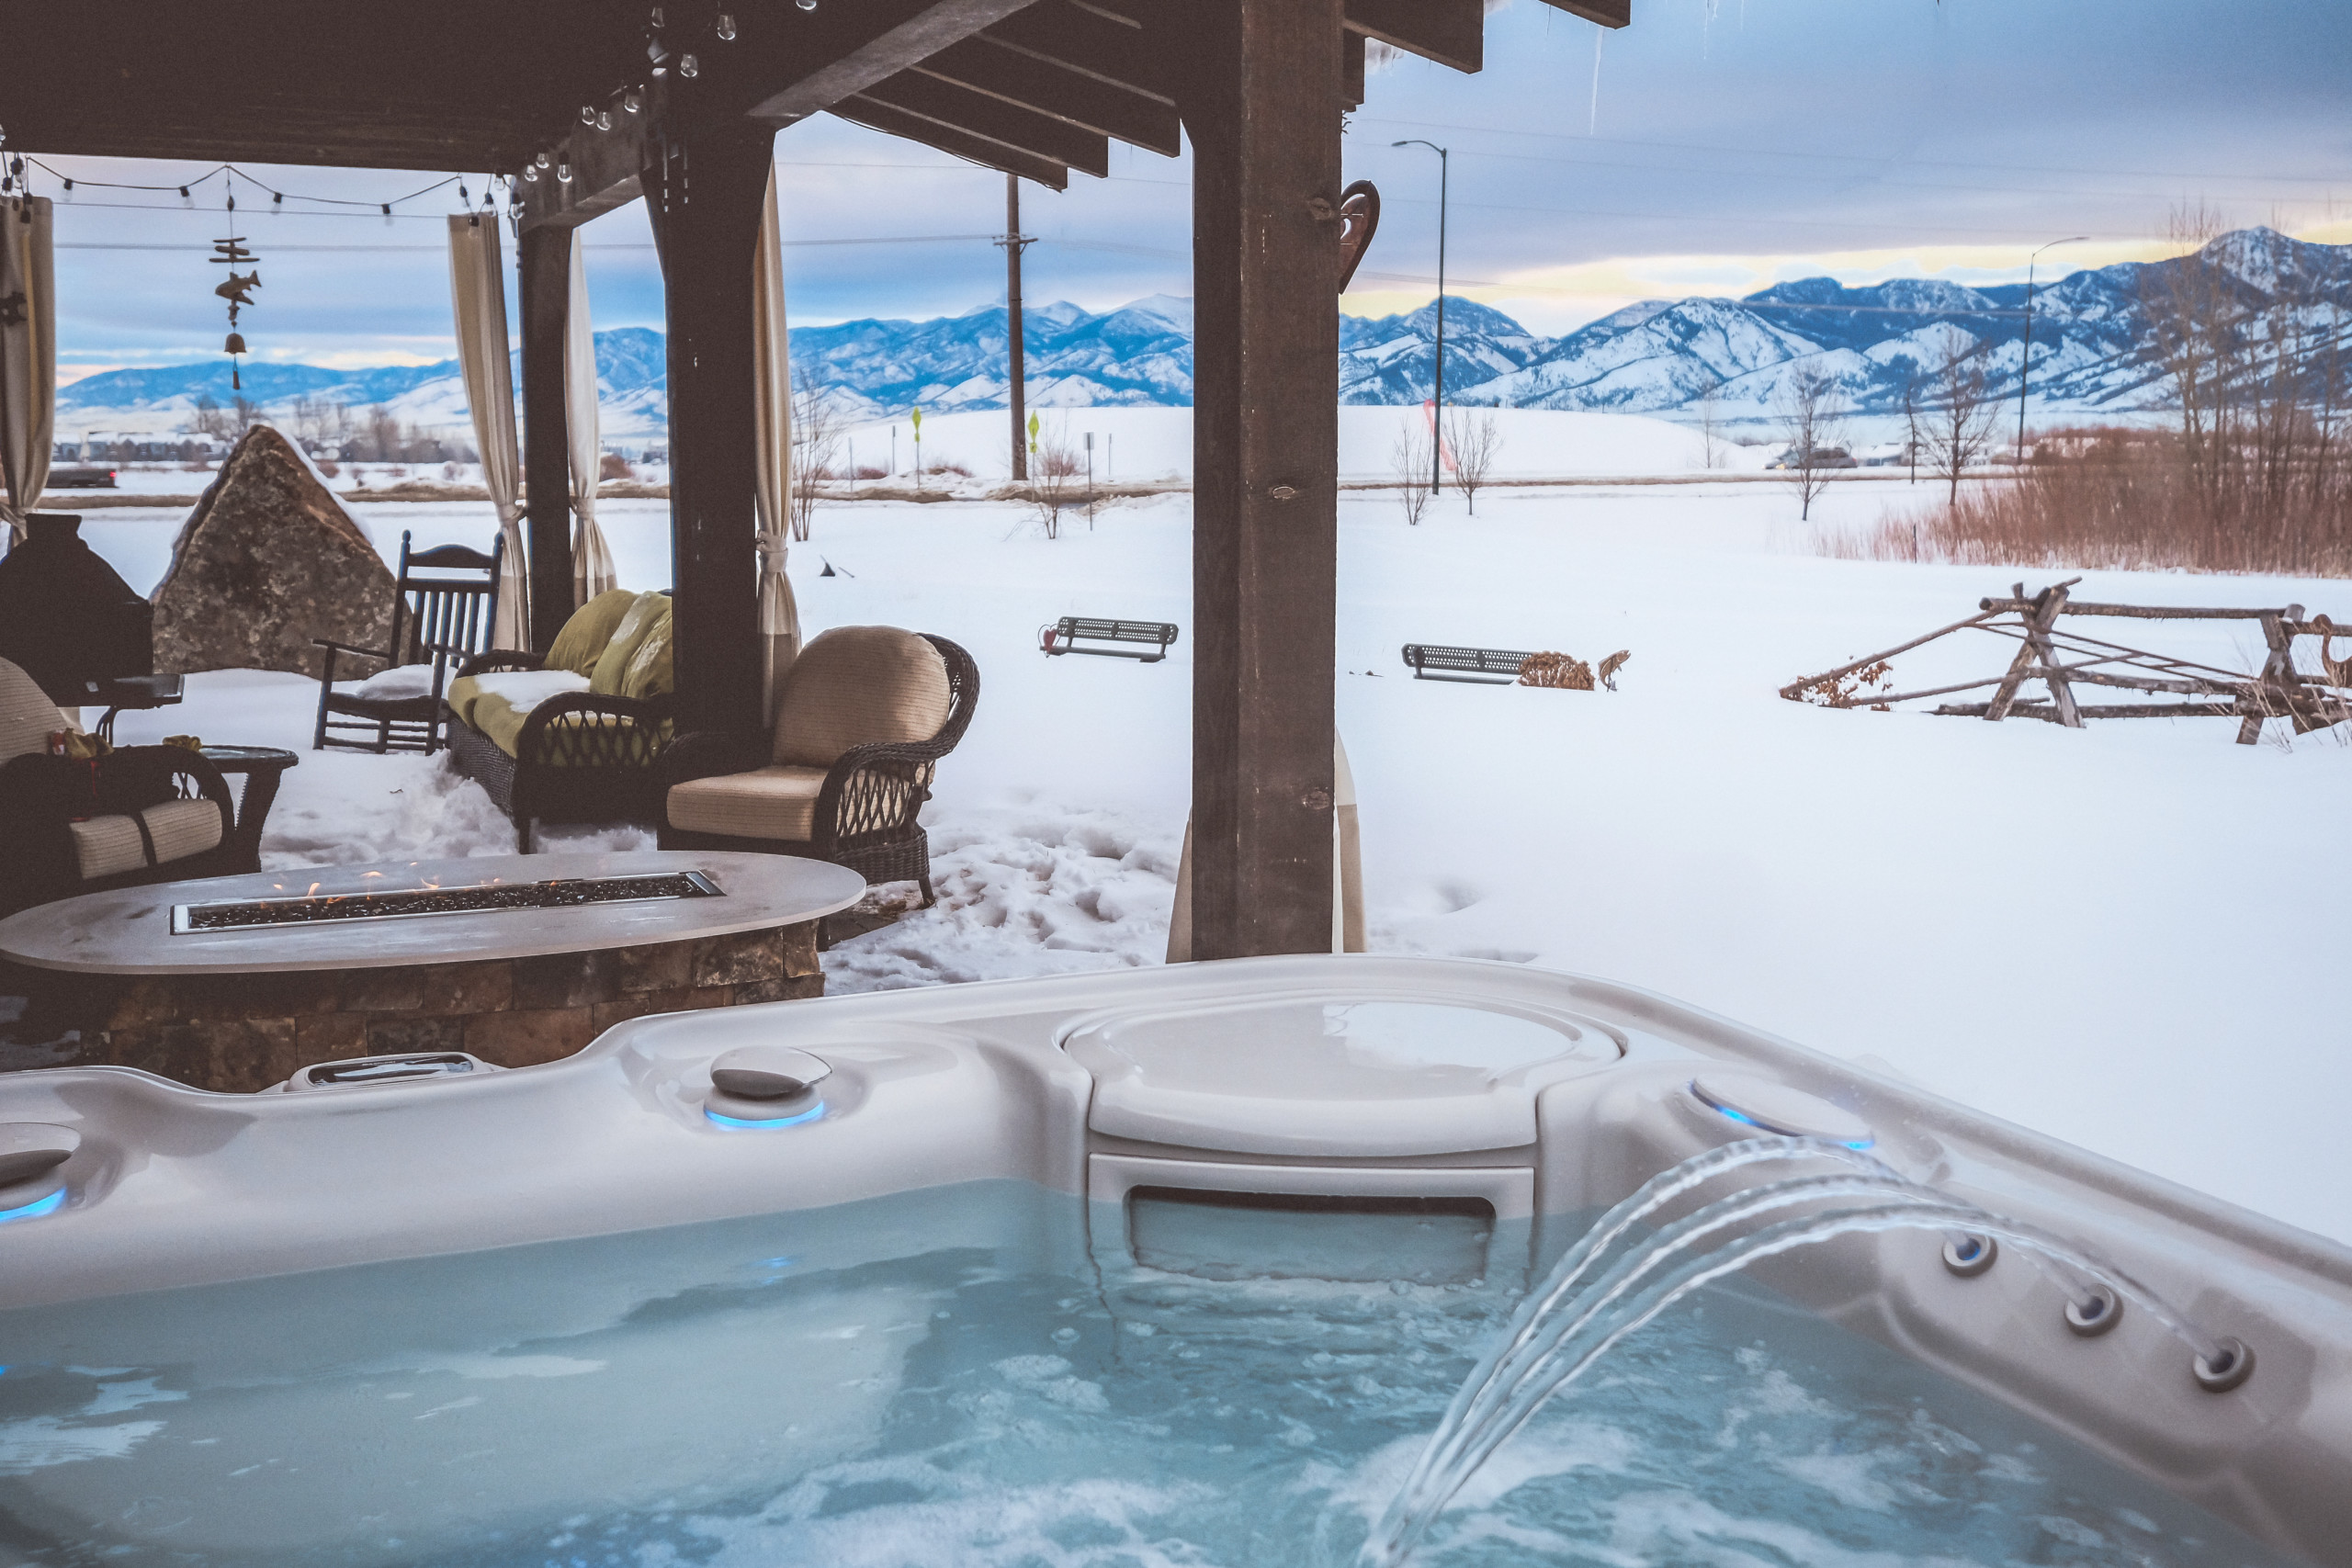 hot tub outdoors in the winter